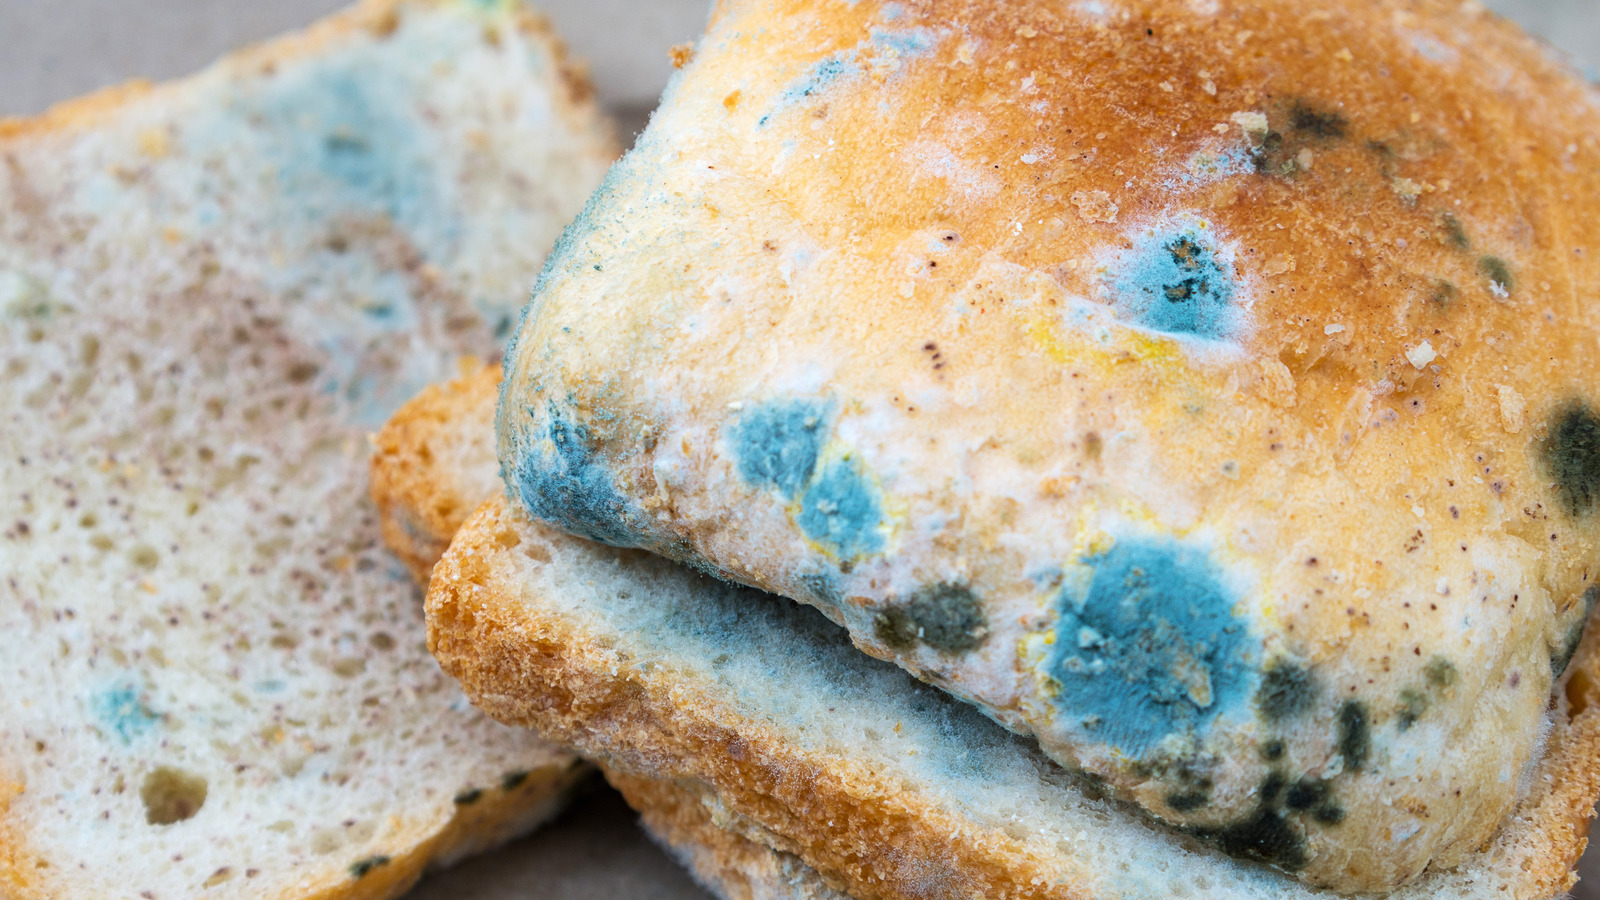 https://www.thelist.com/img/gallery/when-you-eat-moldy-bread-this-is-what-happens-to-your-body/l-intro-1624813042.jpg